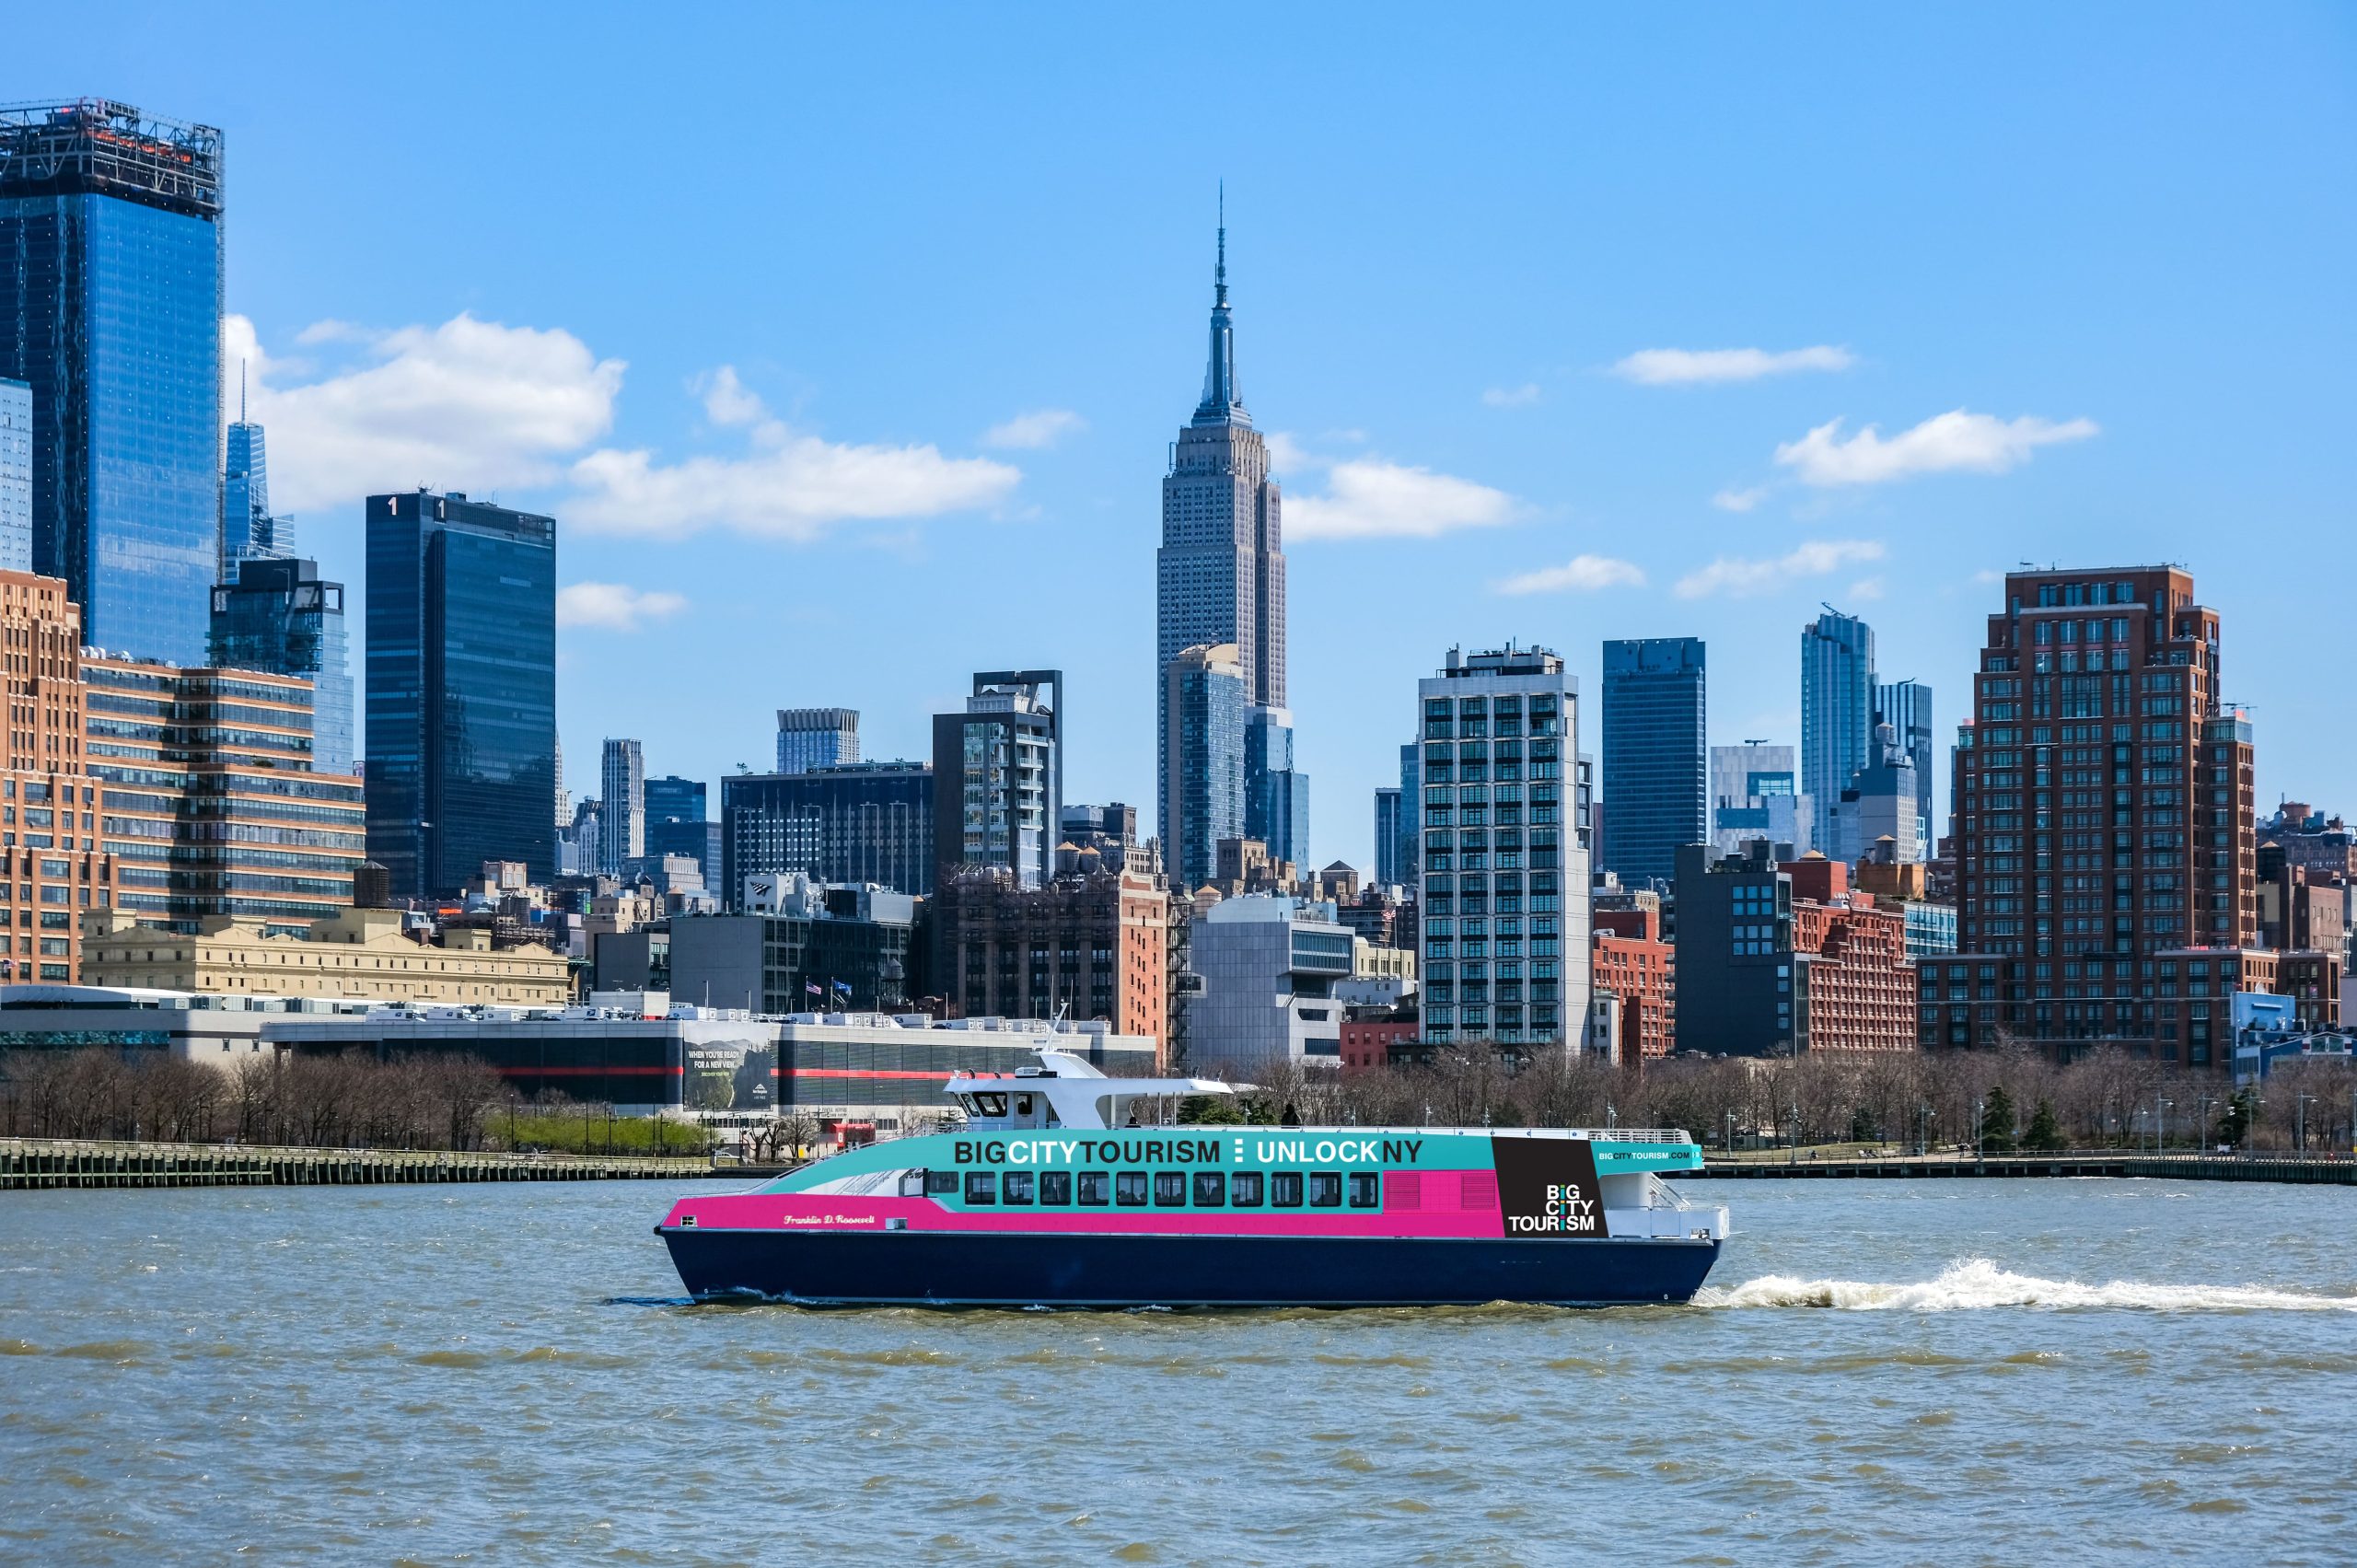 The Ultimate Guide to Midtown New York - Big City Tourism